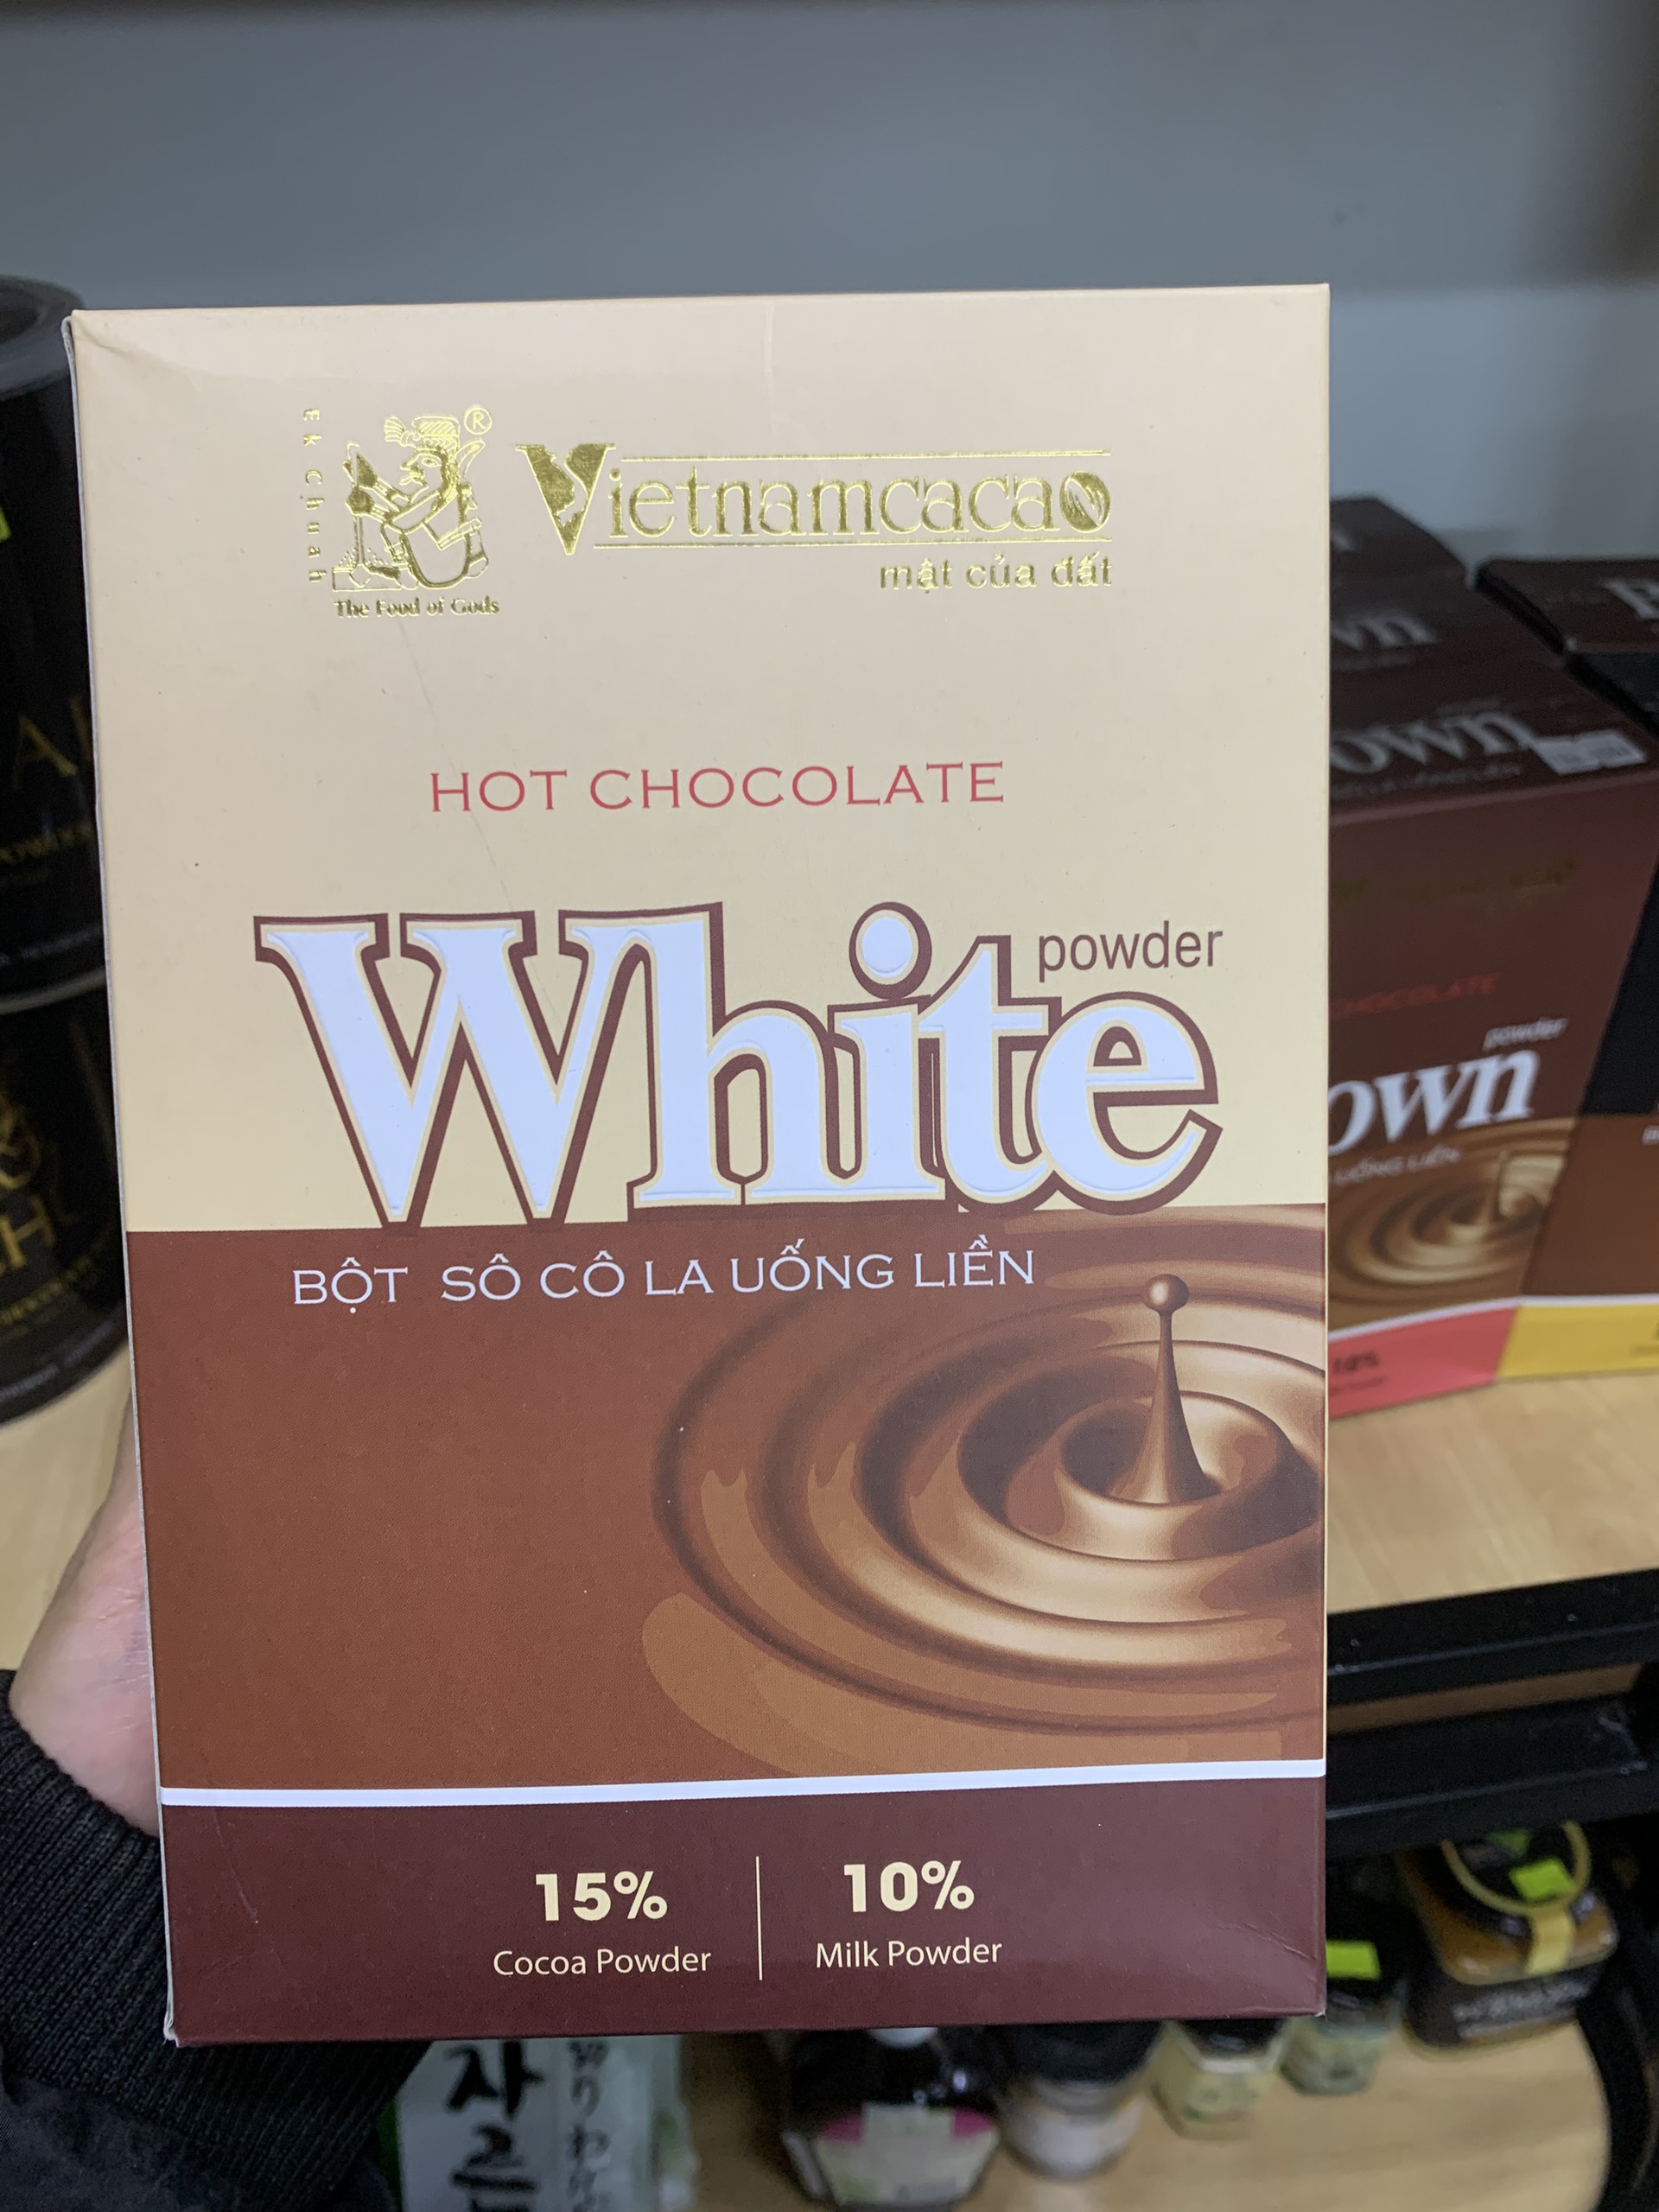 Bột Cacao Hot Chocolate White Vinacacao 300 g Hộp